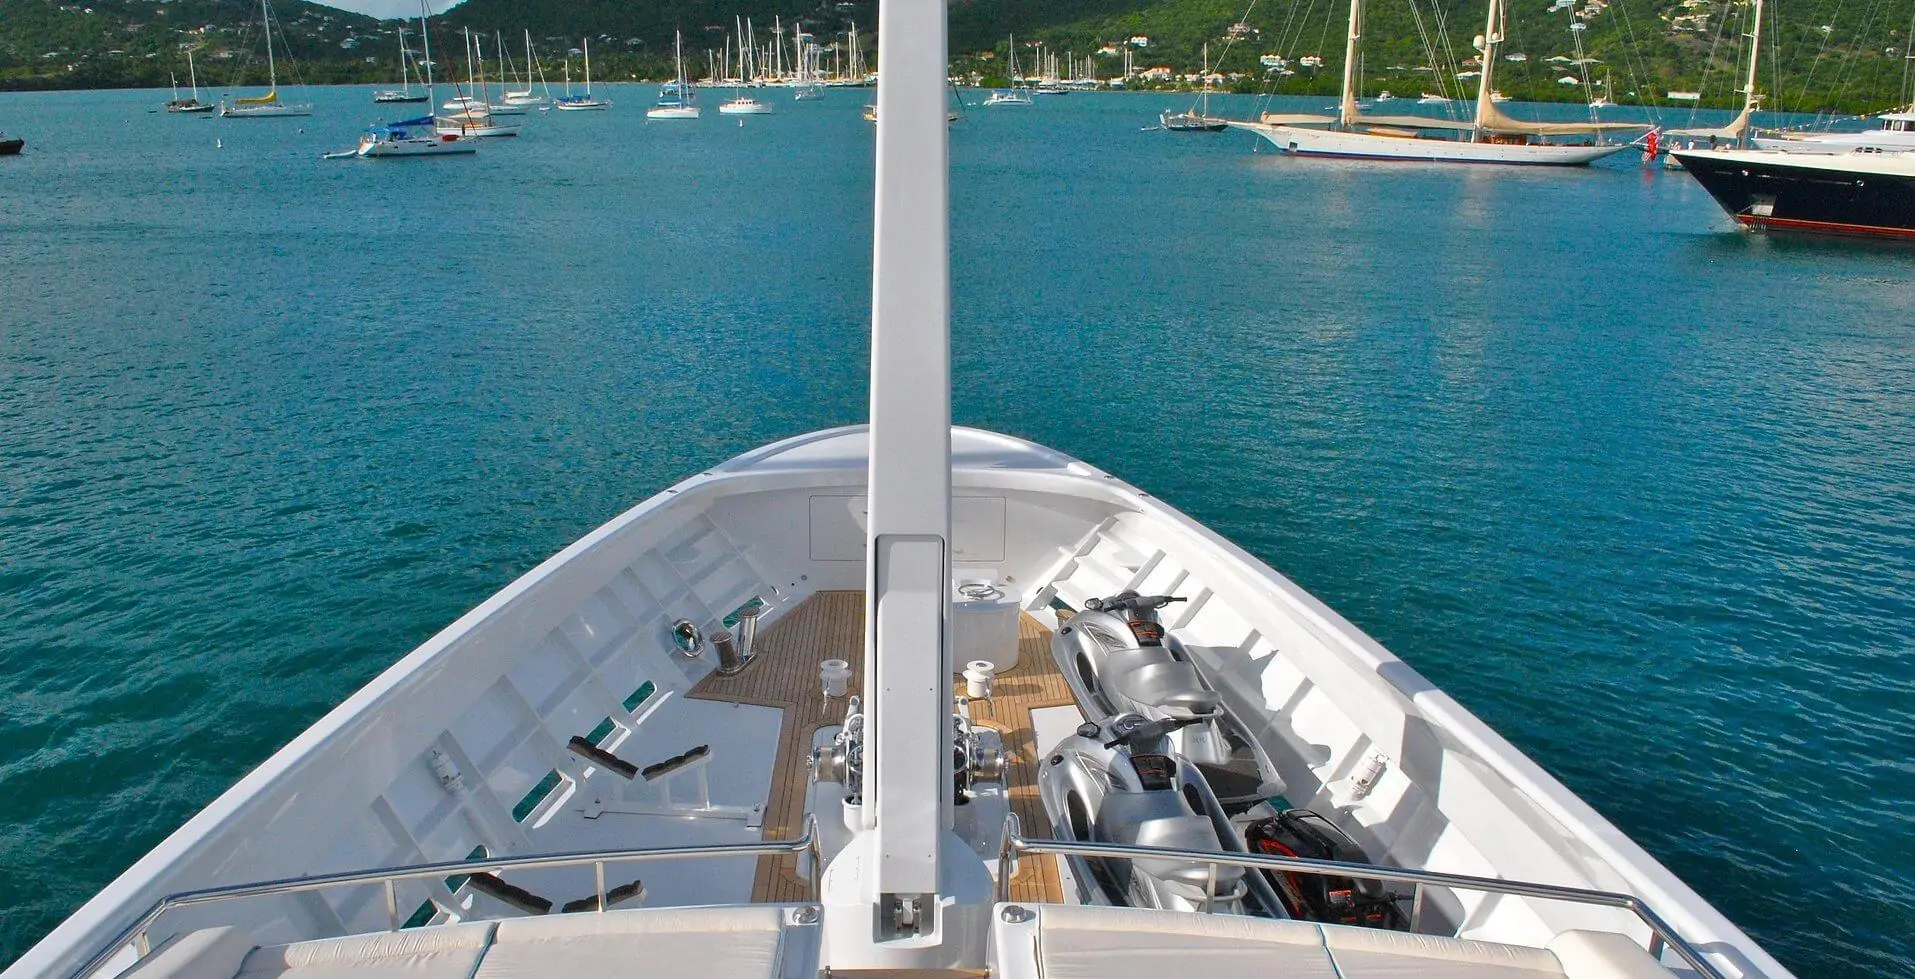 Tours on the yacht in Antigua and Barbuda